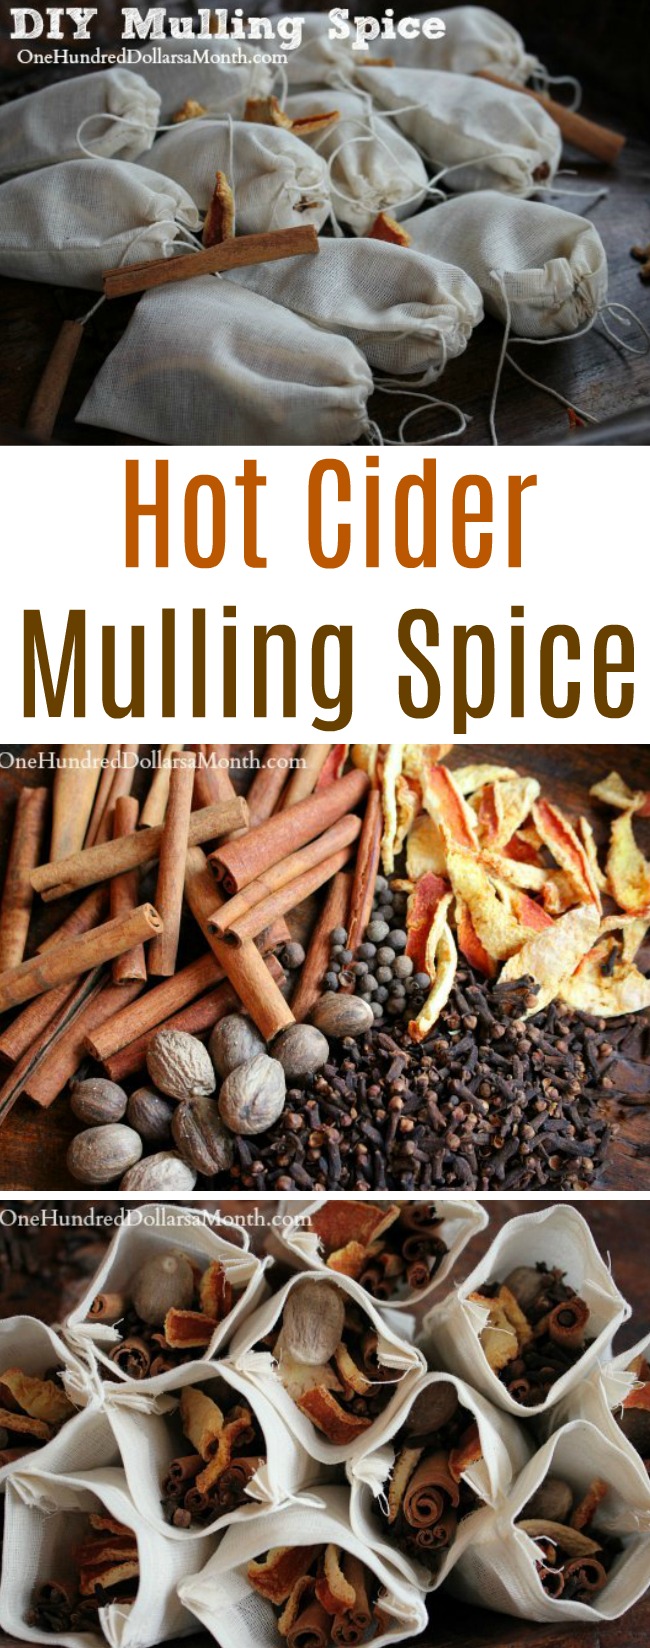 Holiday Gift Idea – Homemade Hot Cider Mulling Spice